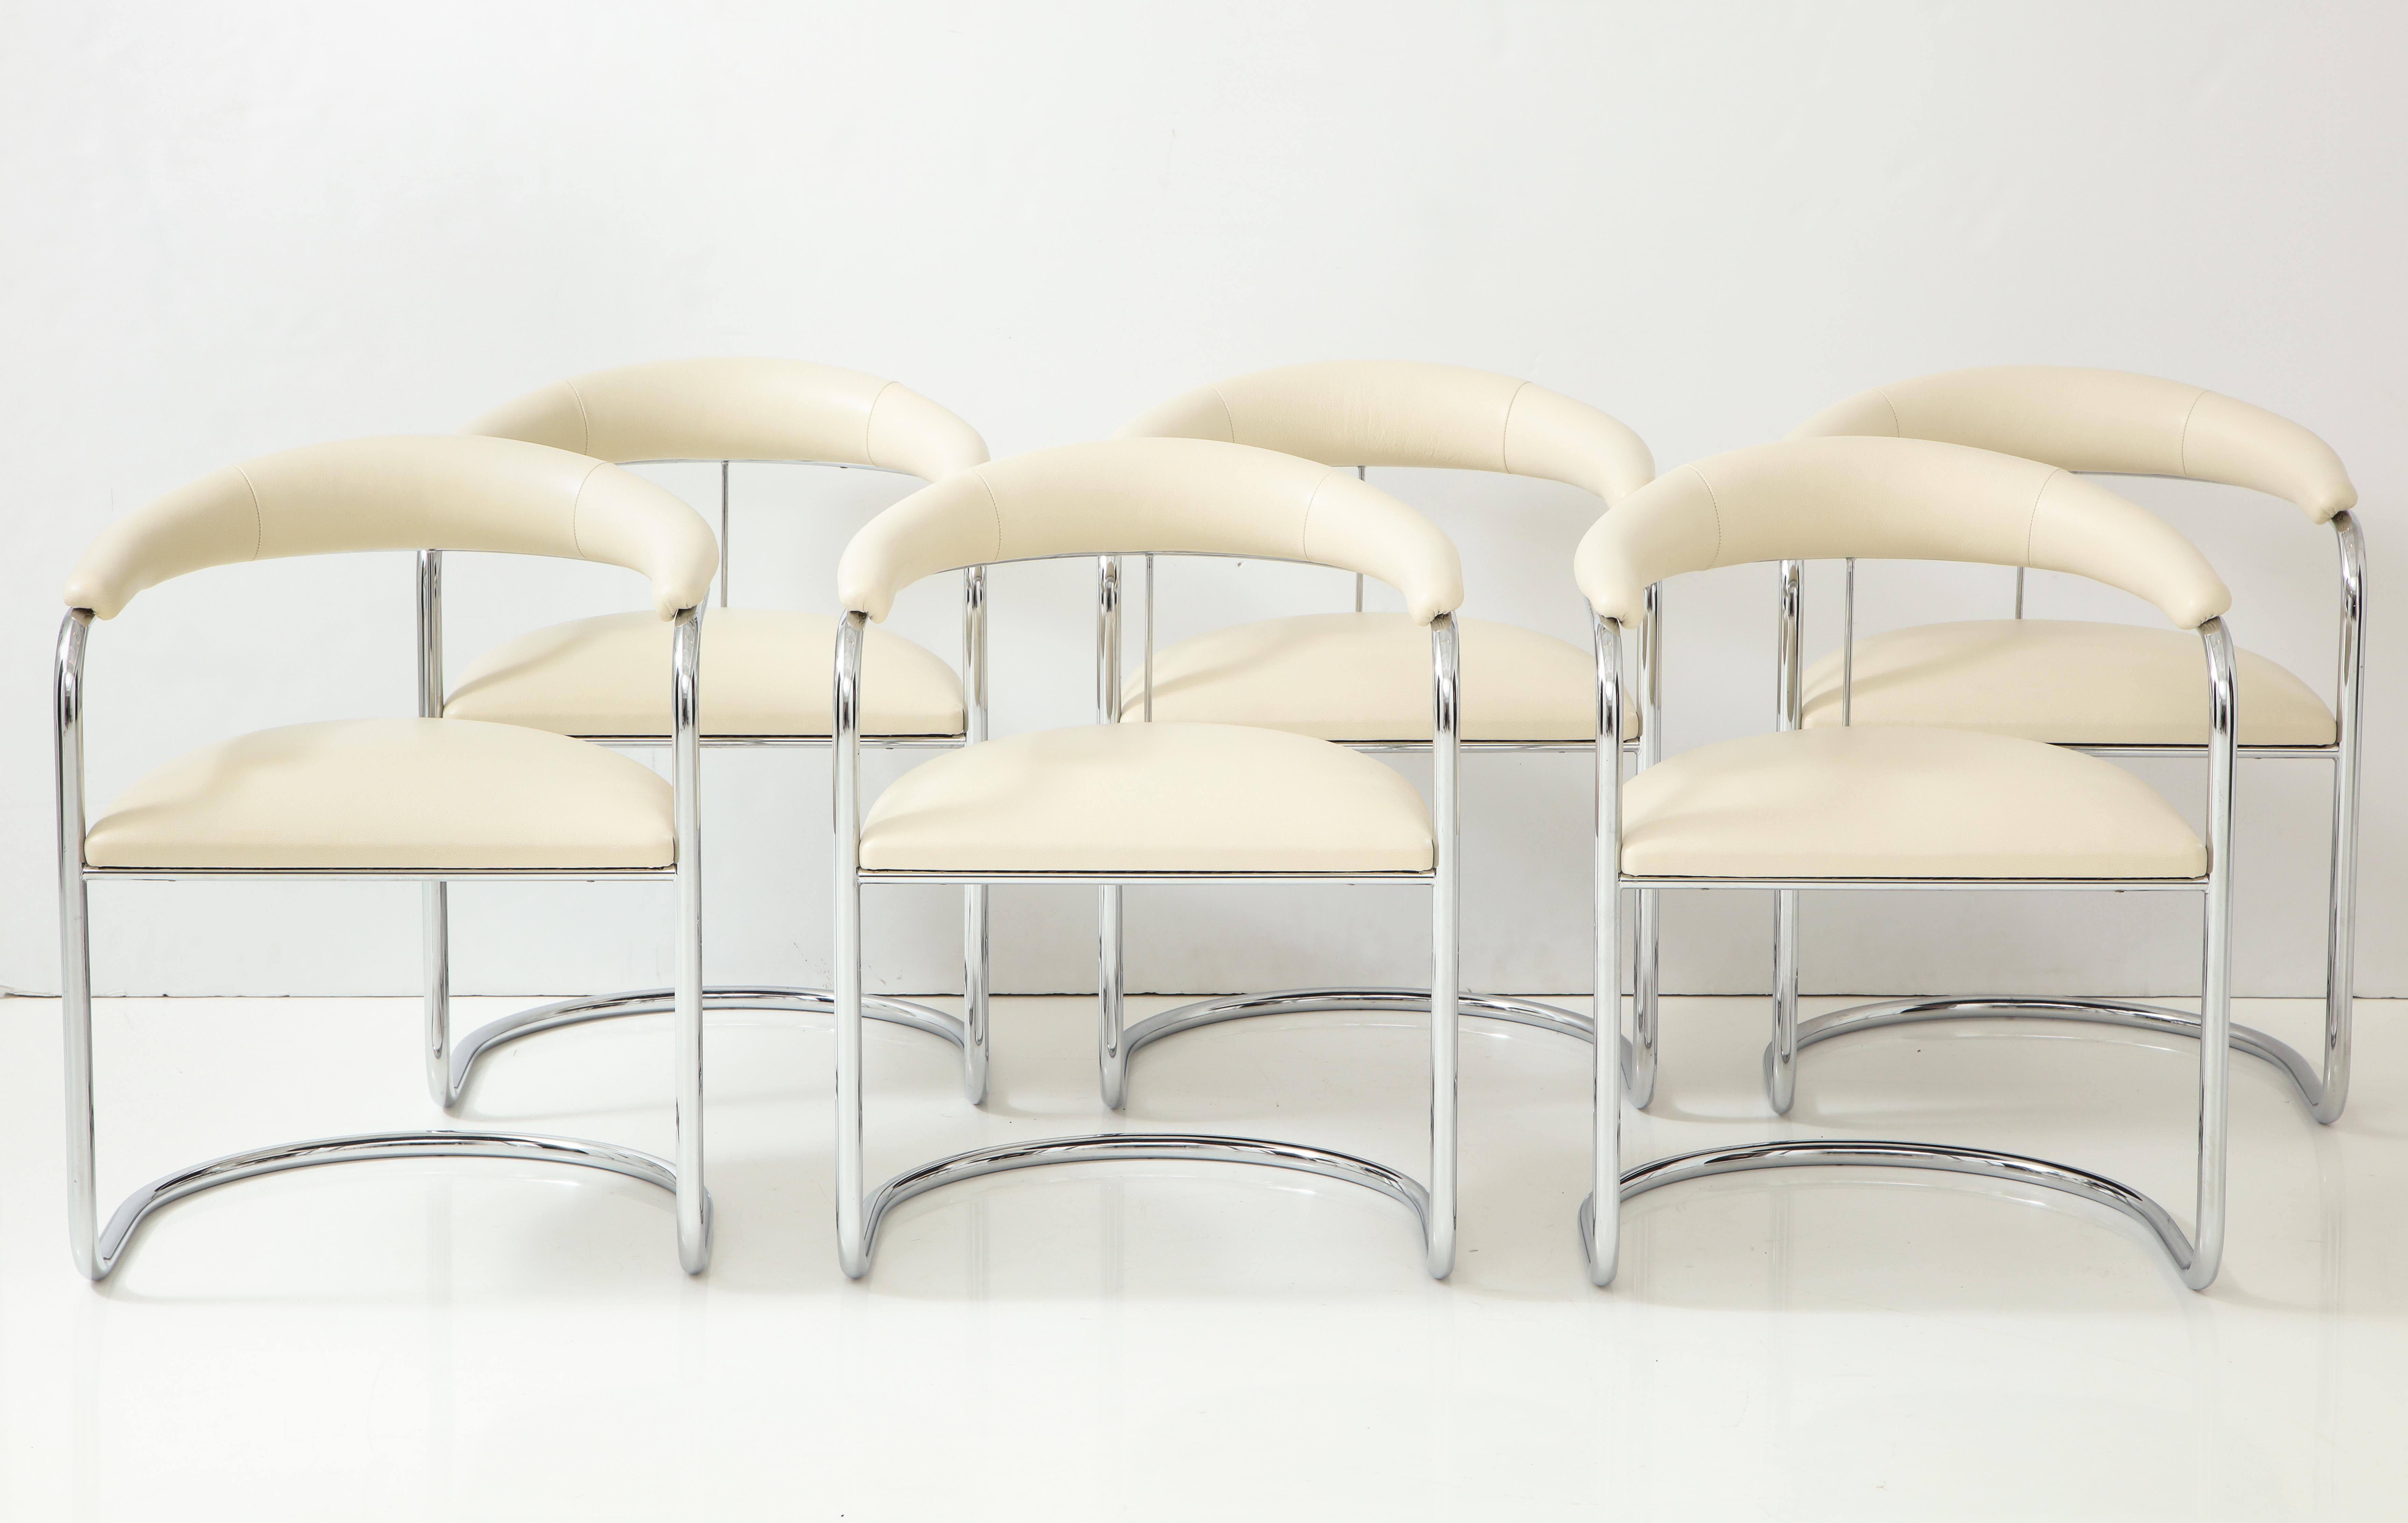 Set of six chrome chairs designed by Anton Lorenz for Thonet.
1970s chrome tubular chairs with new soft Ivory leather upholstery.